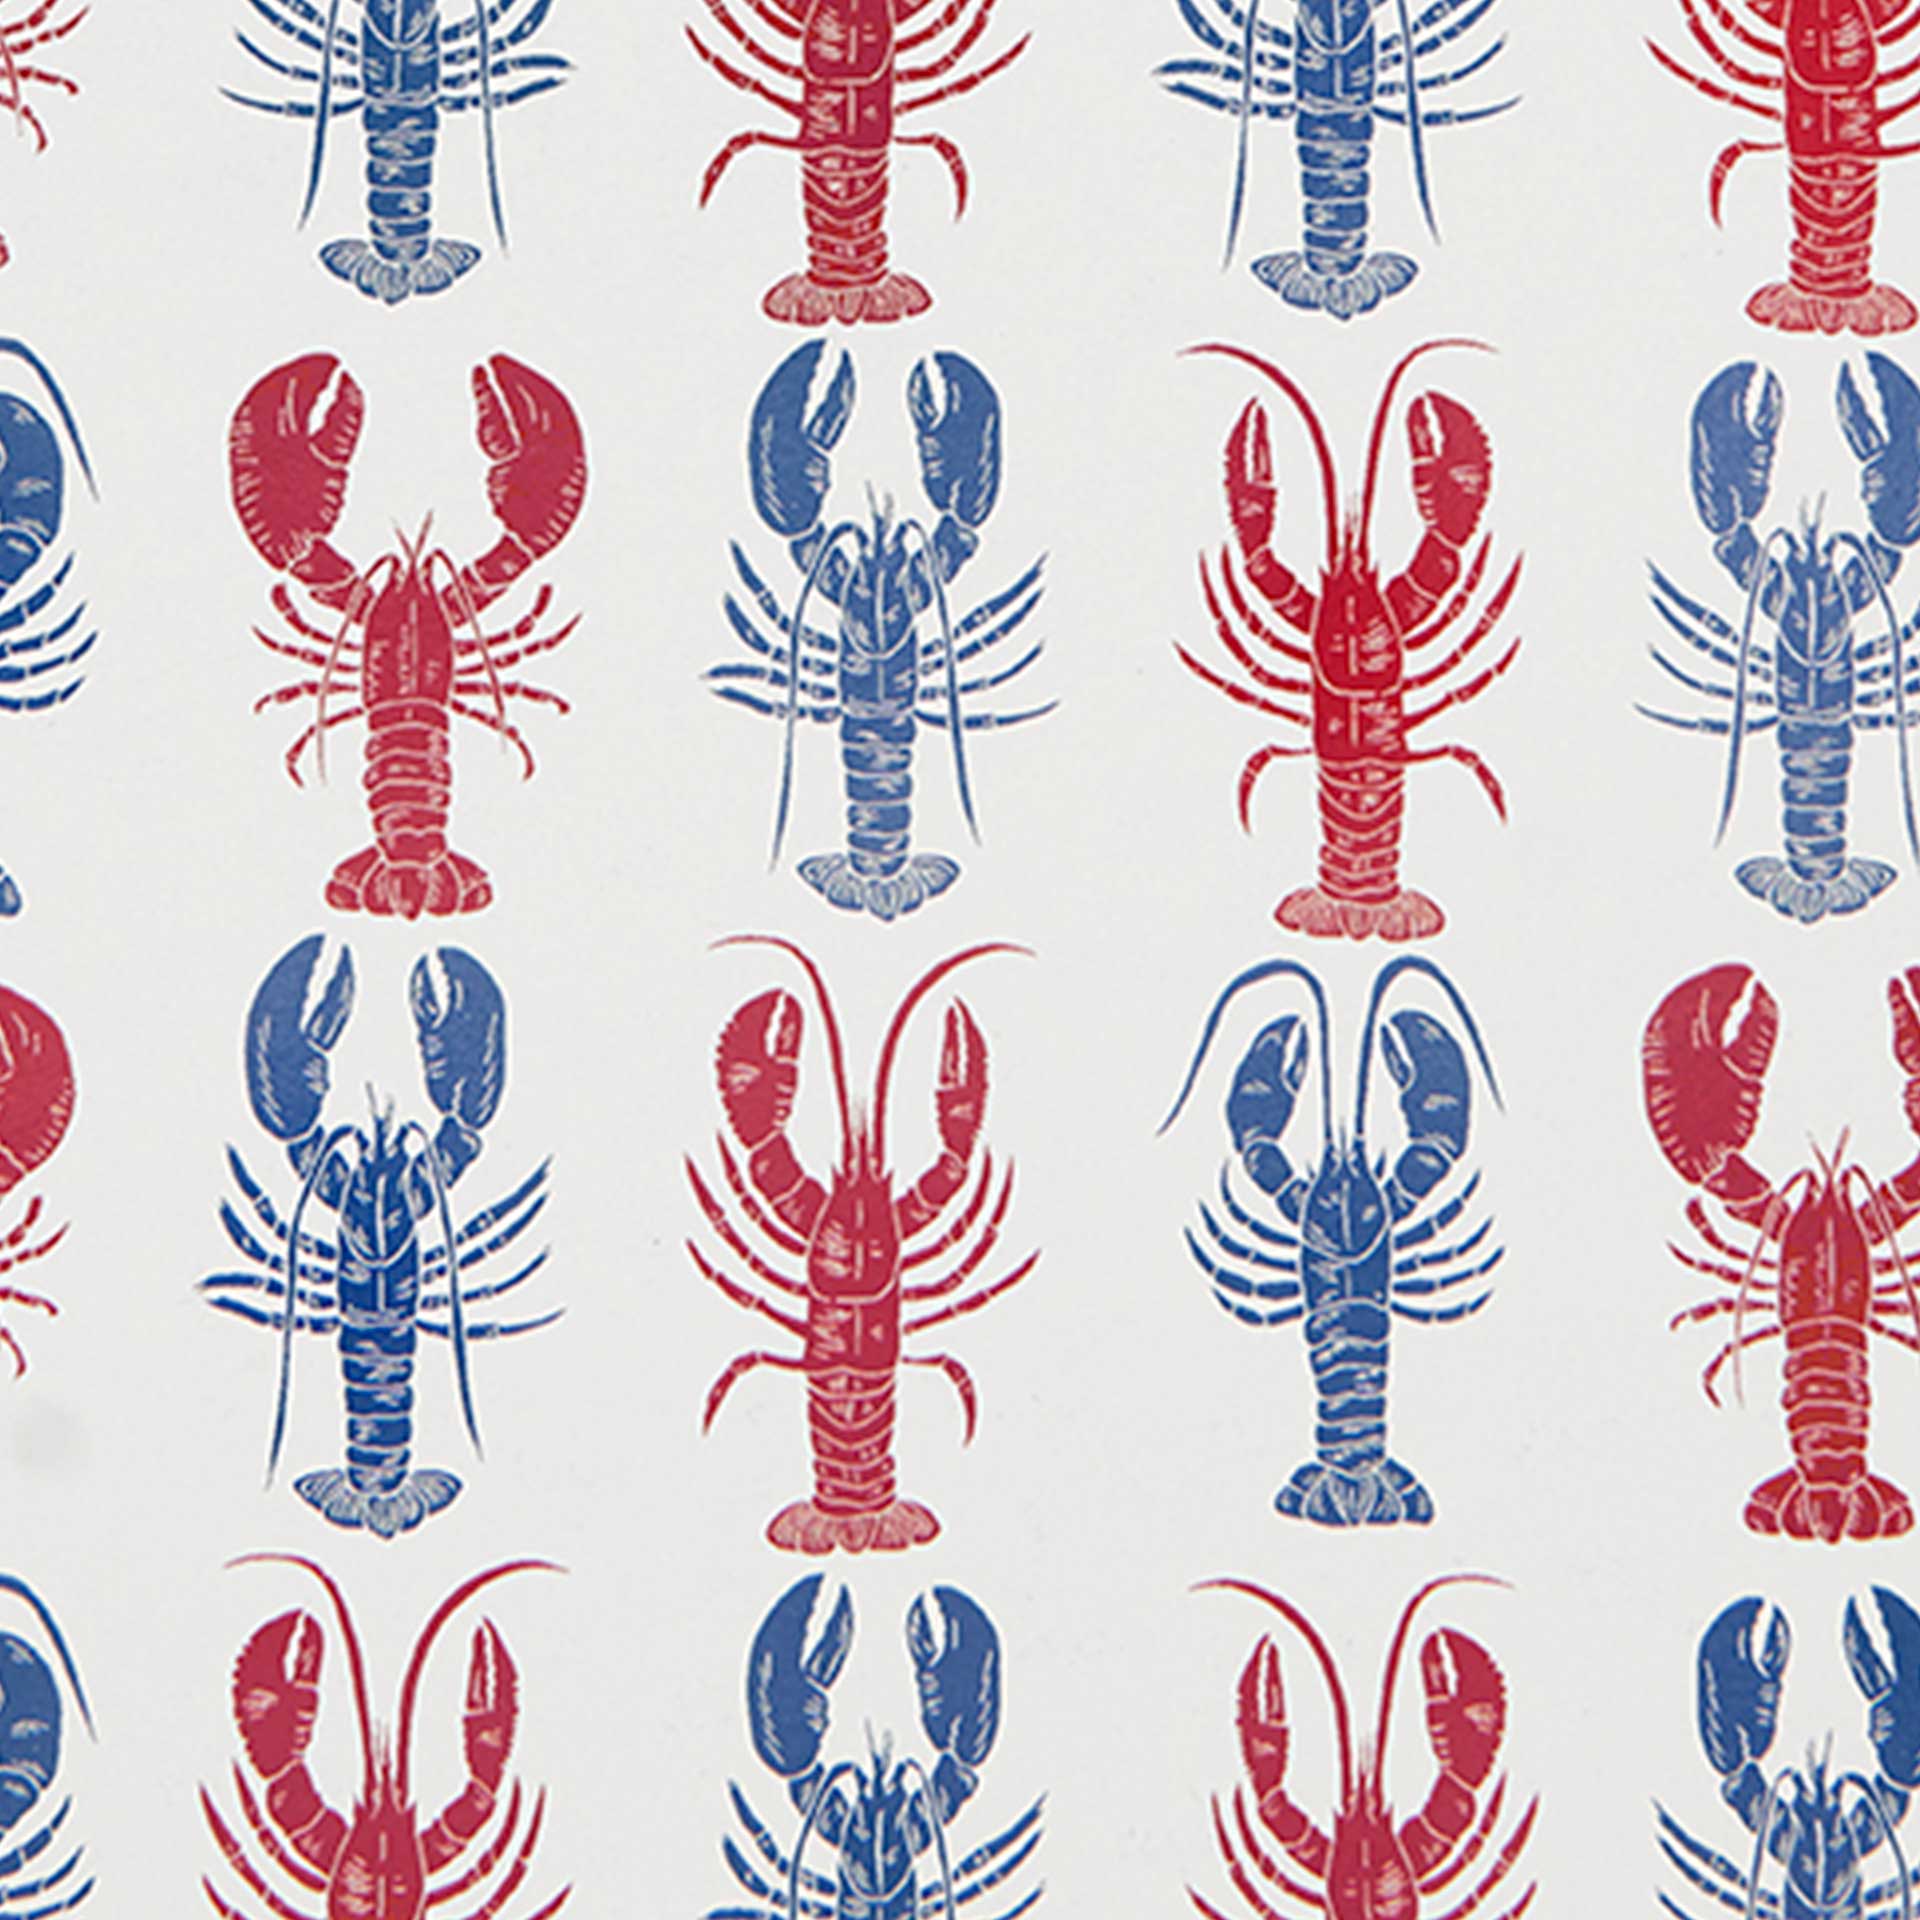 Closeup of a printed pattern of red and blue lobsters